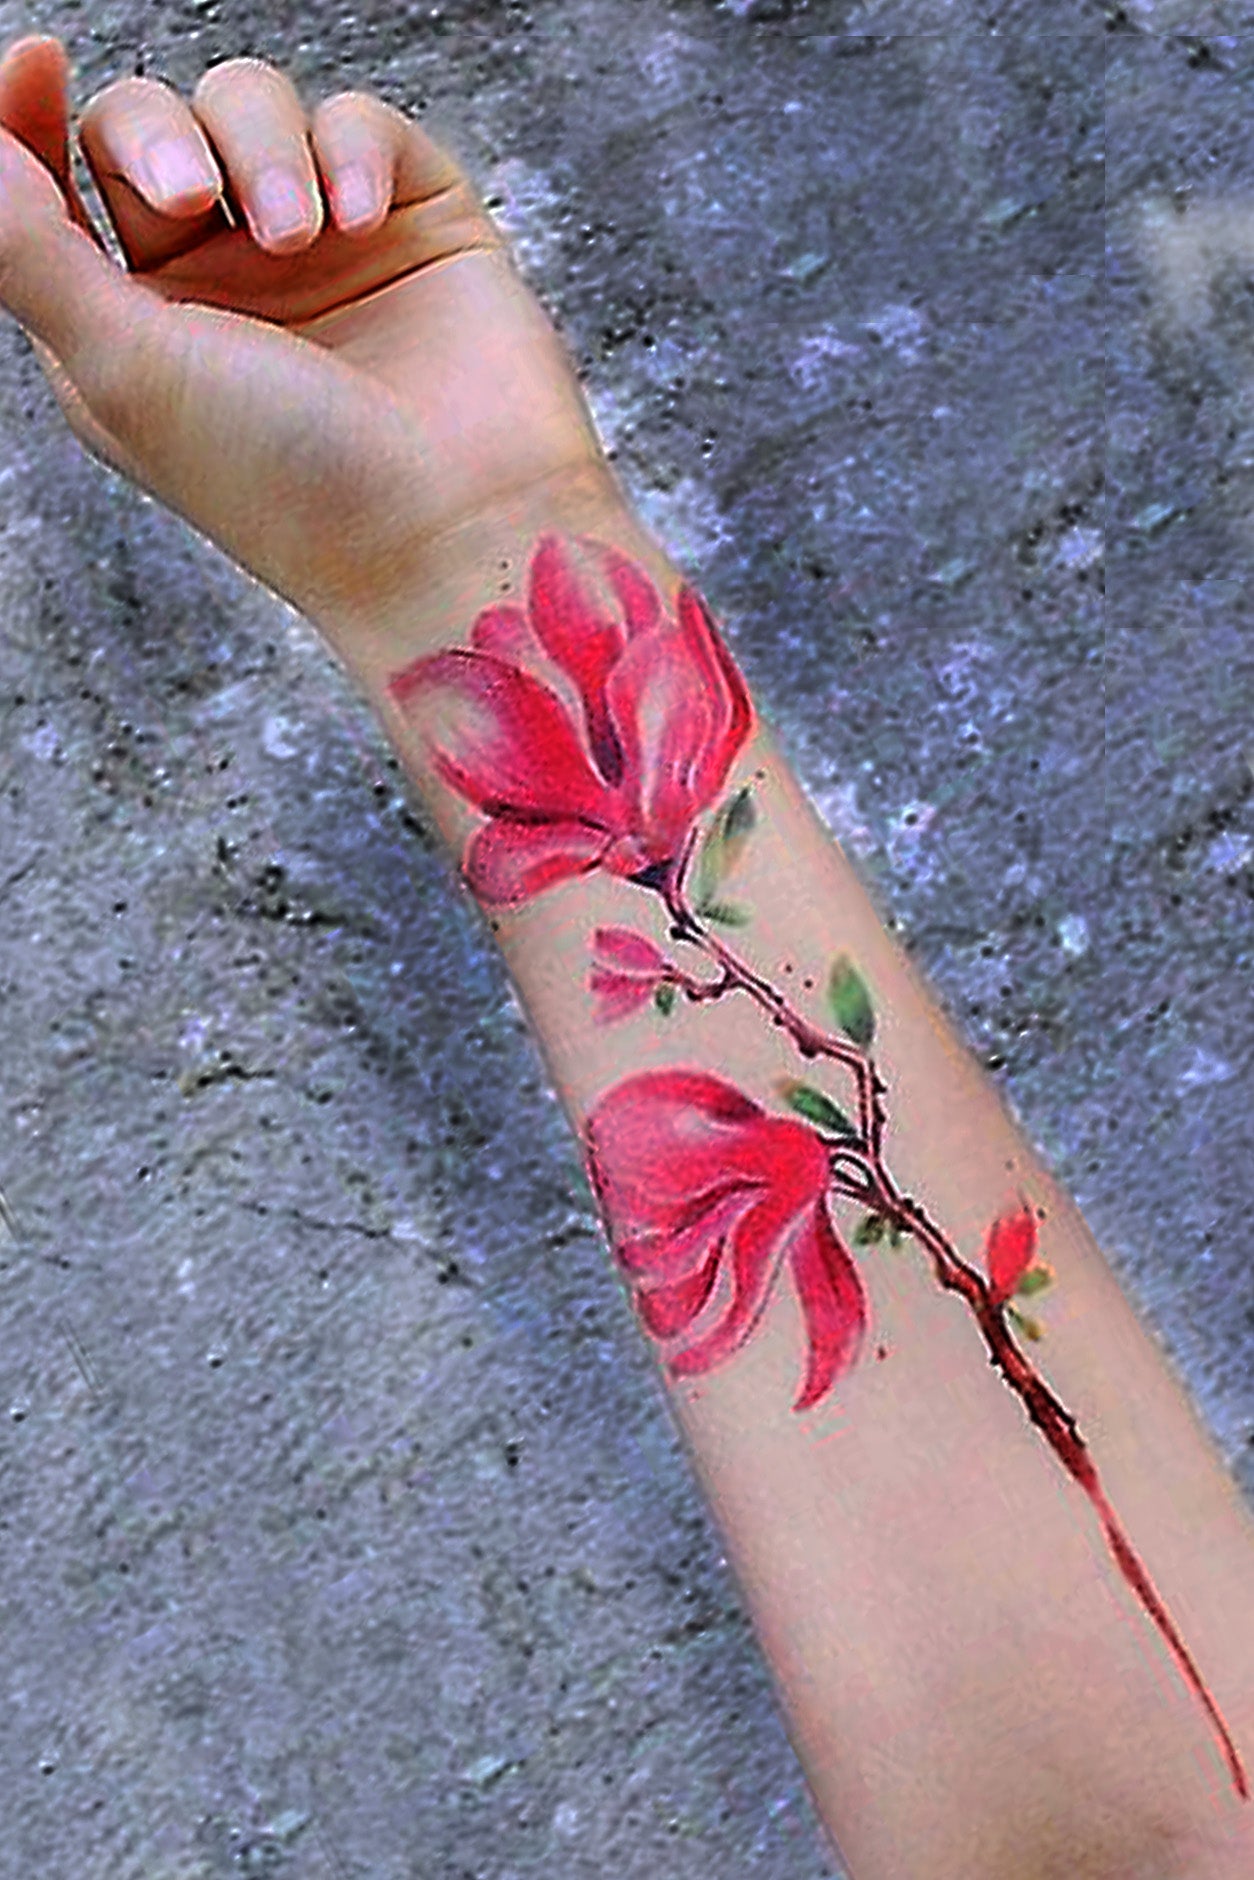 red rose with stem tattoo